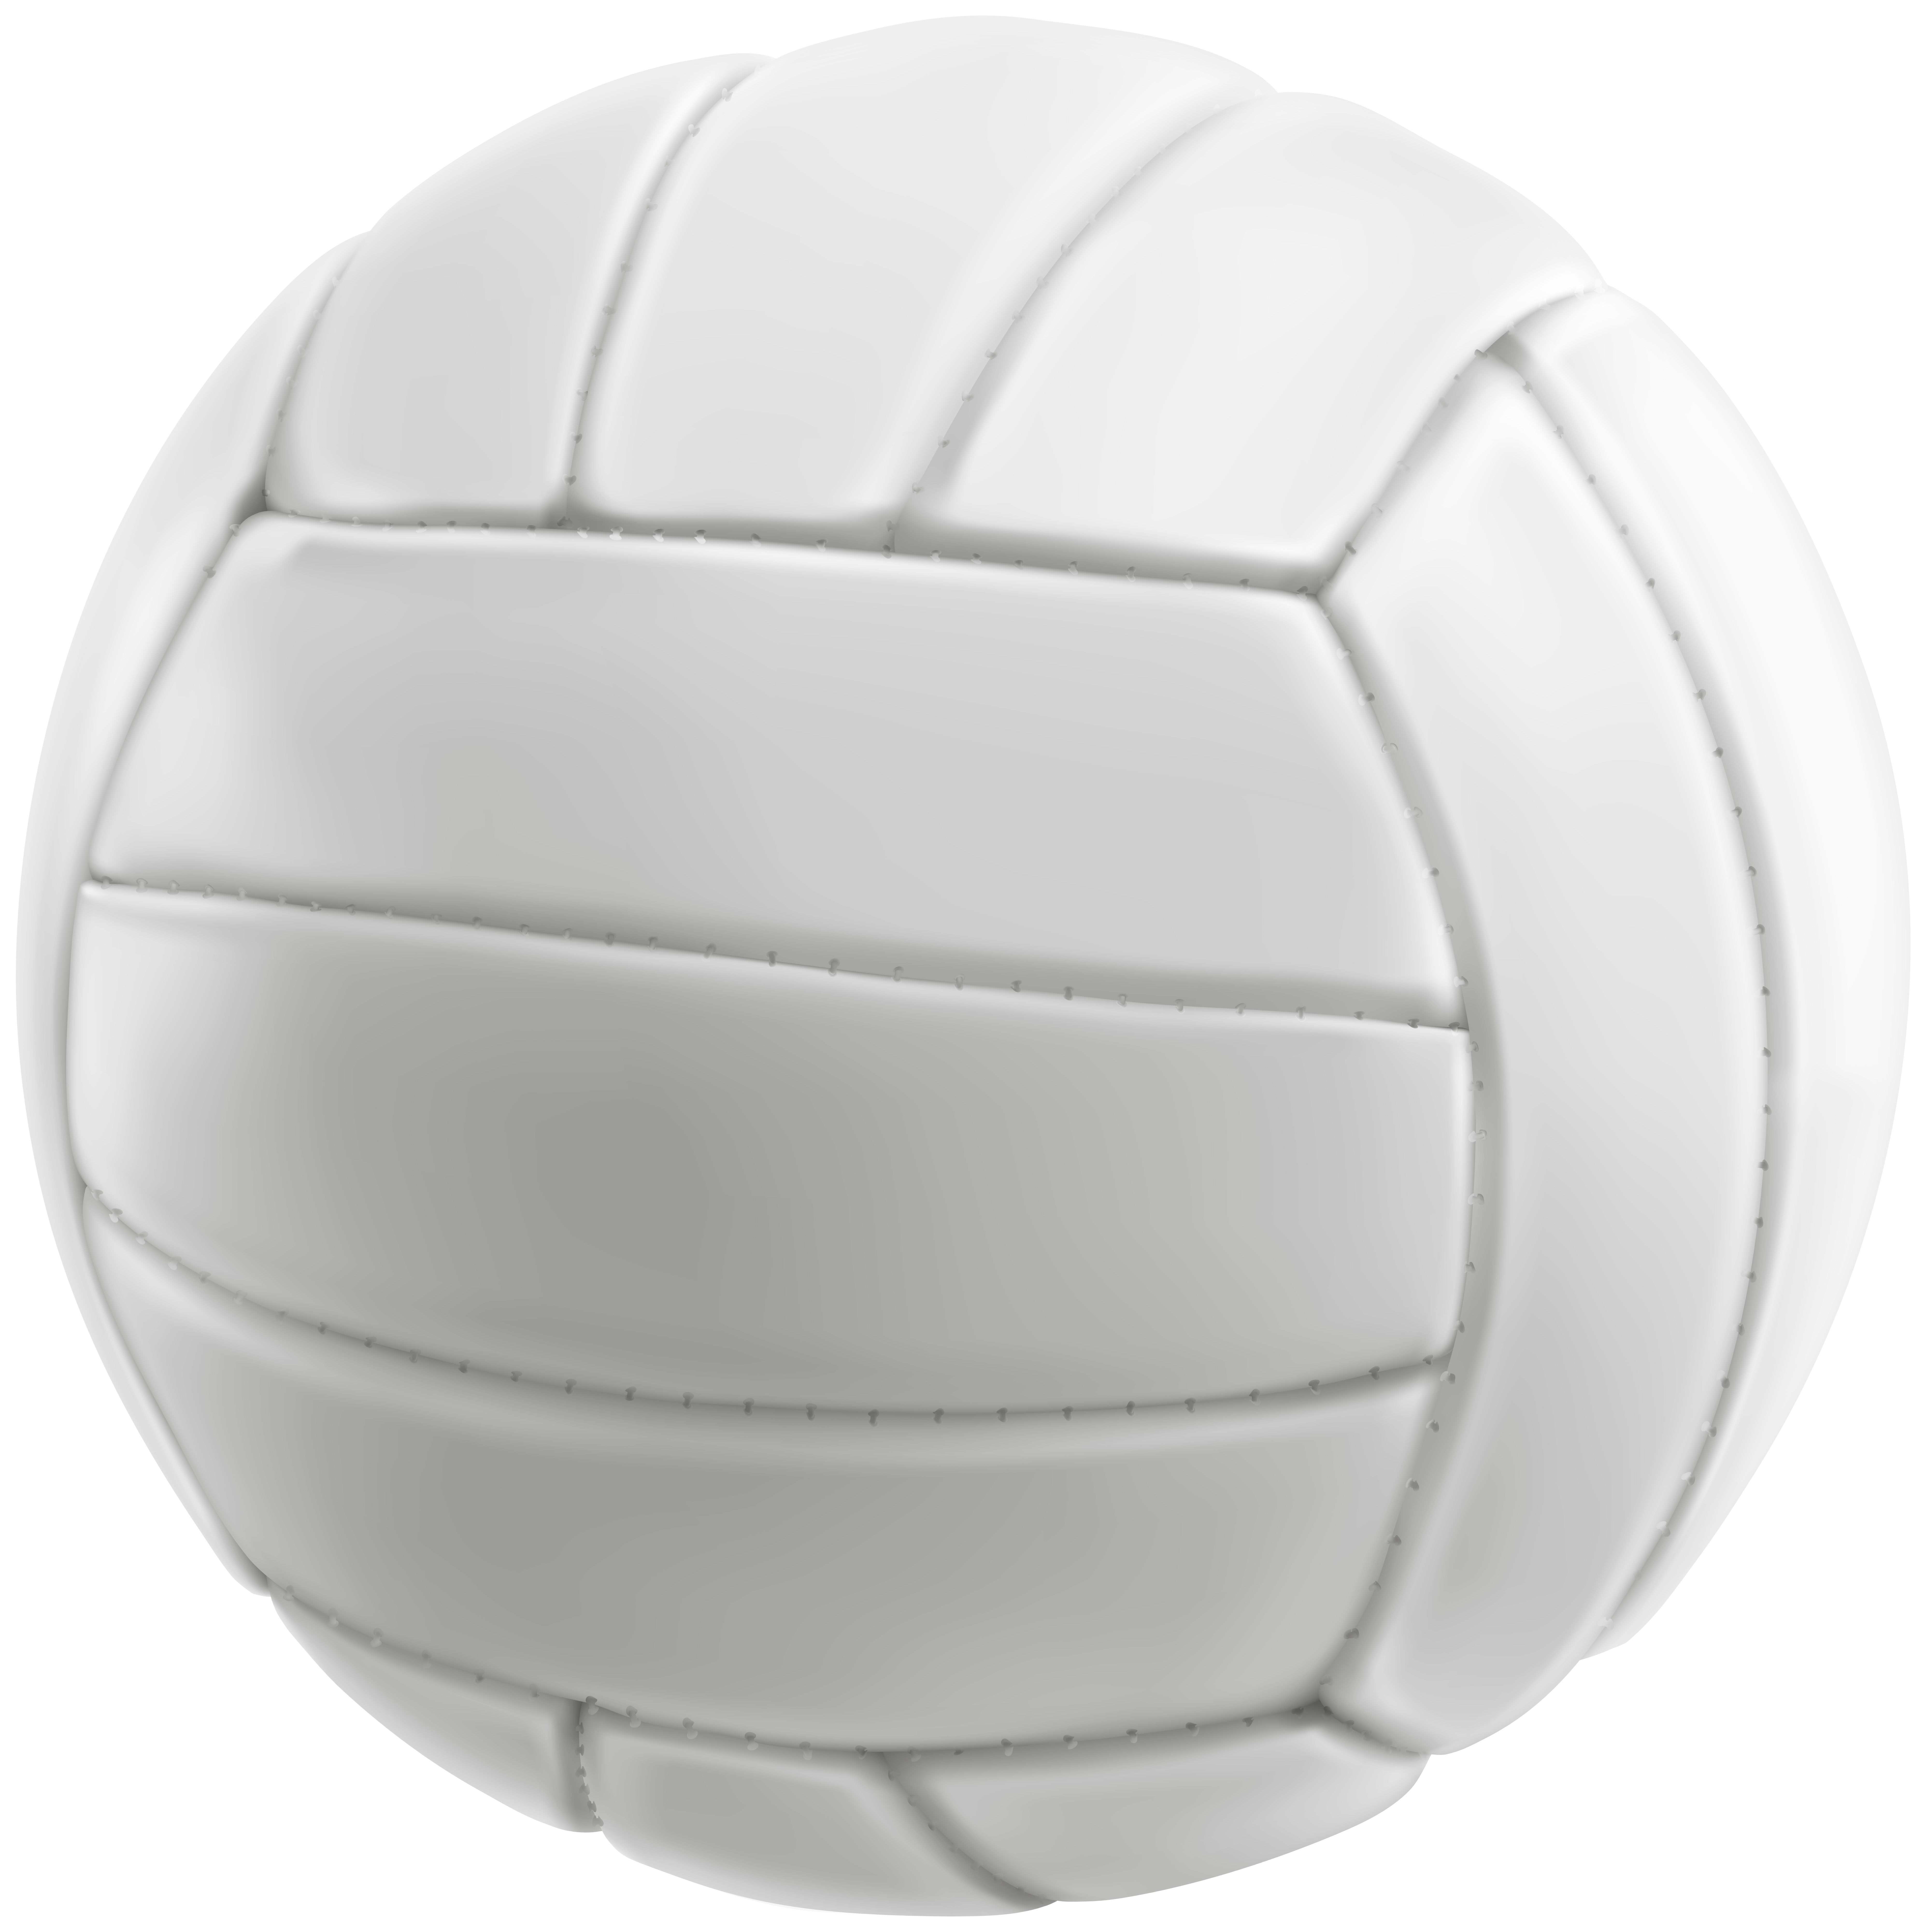 Volleyball Ball PNG Clipart Image.